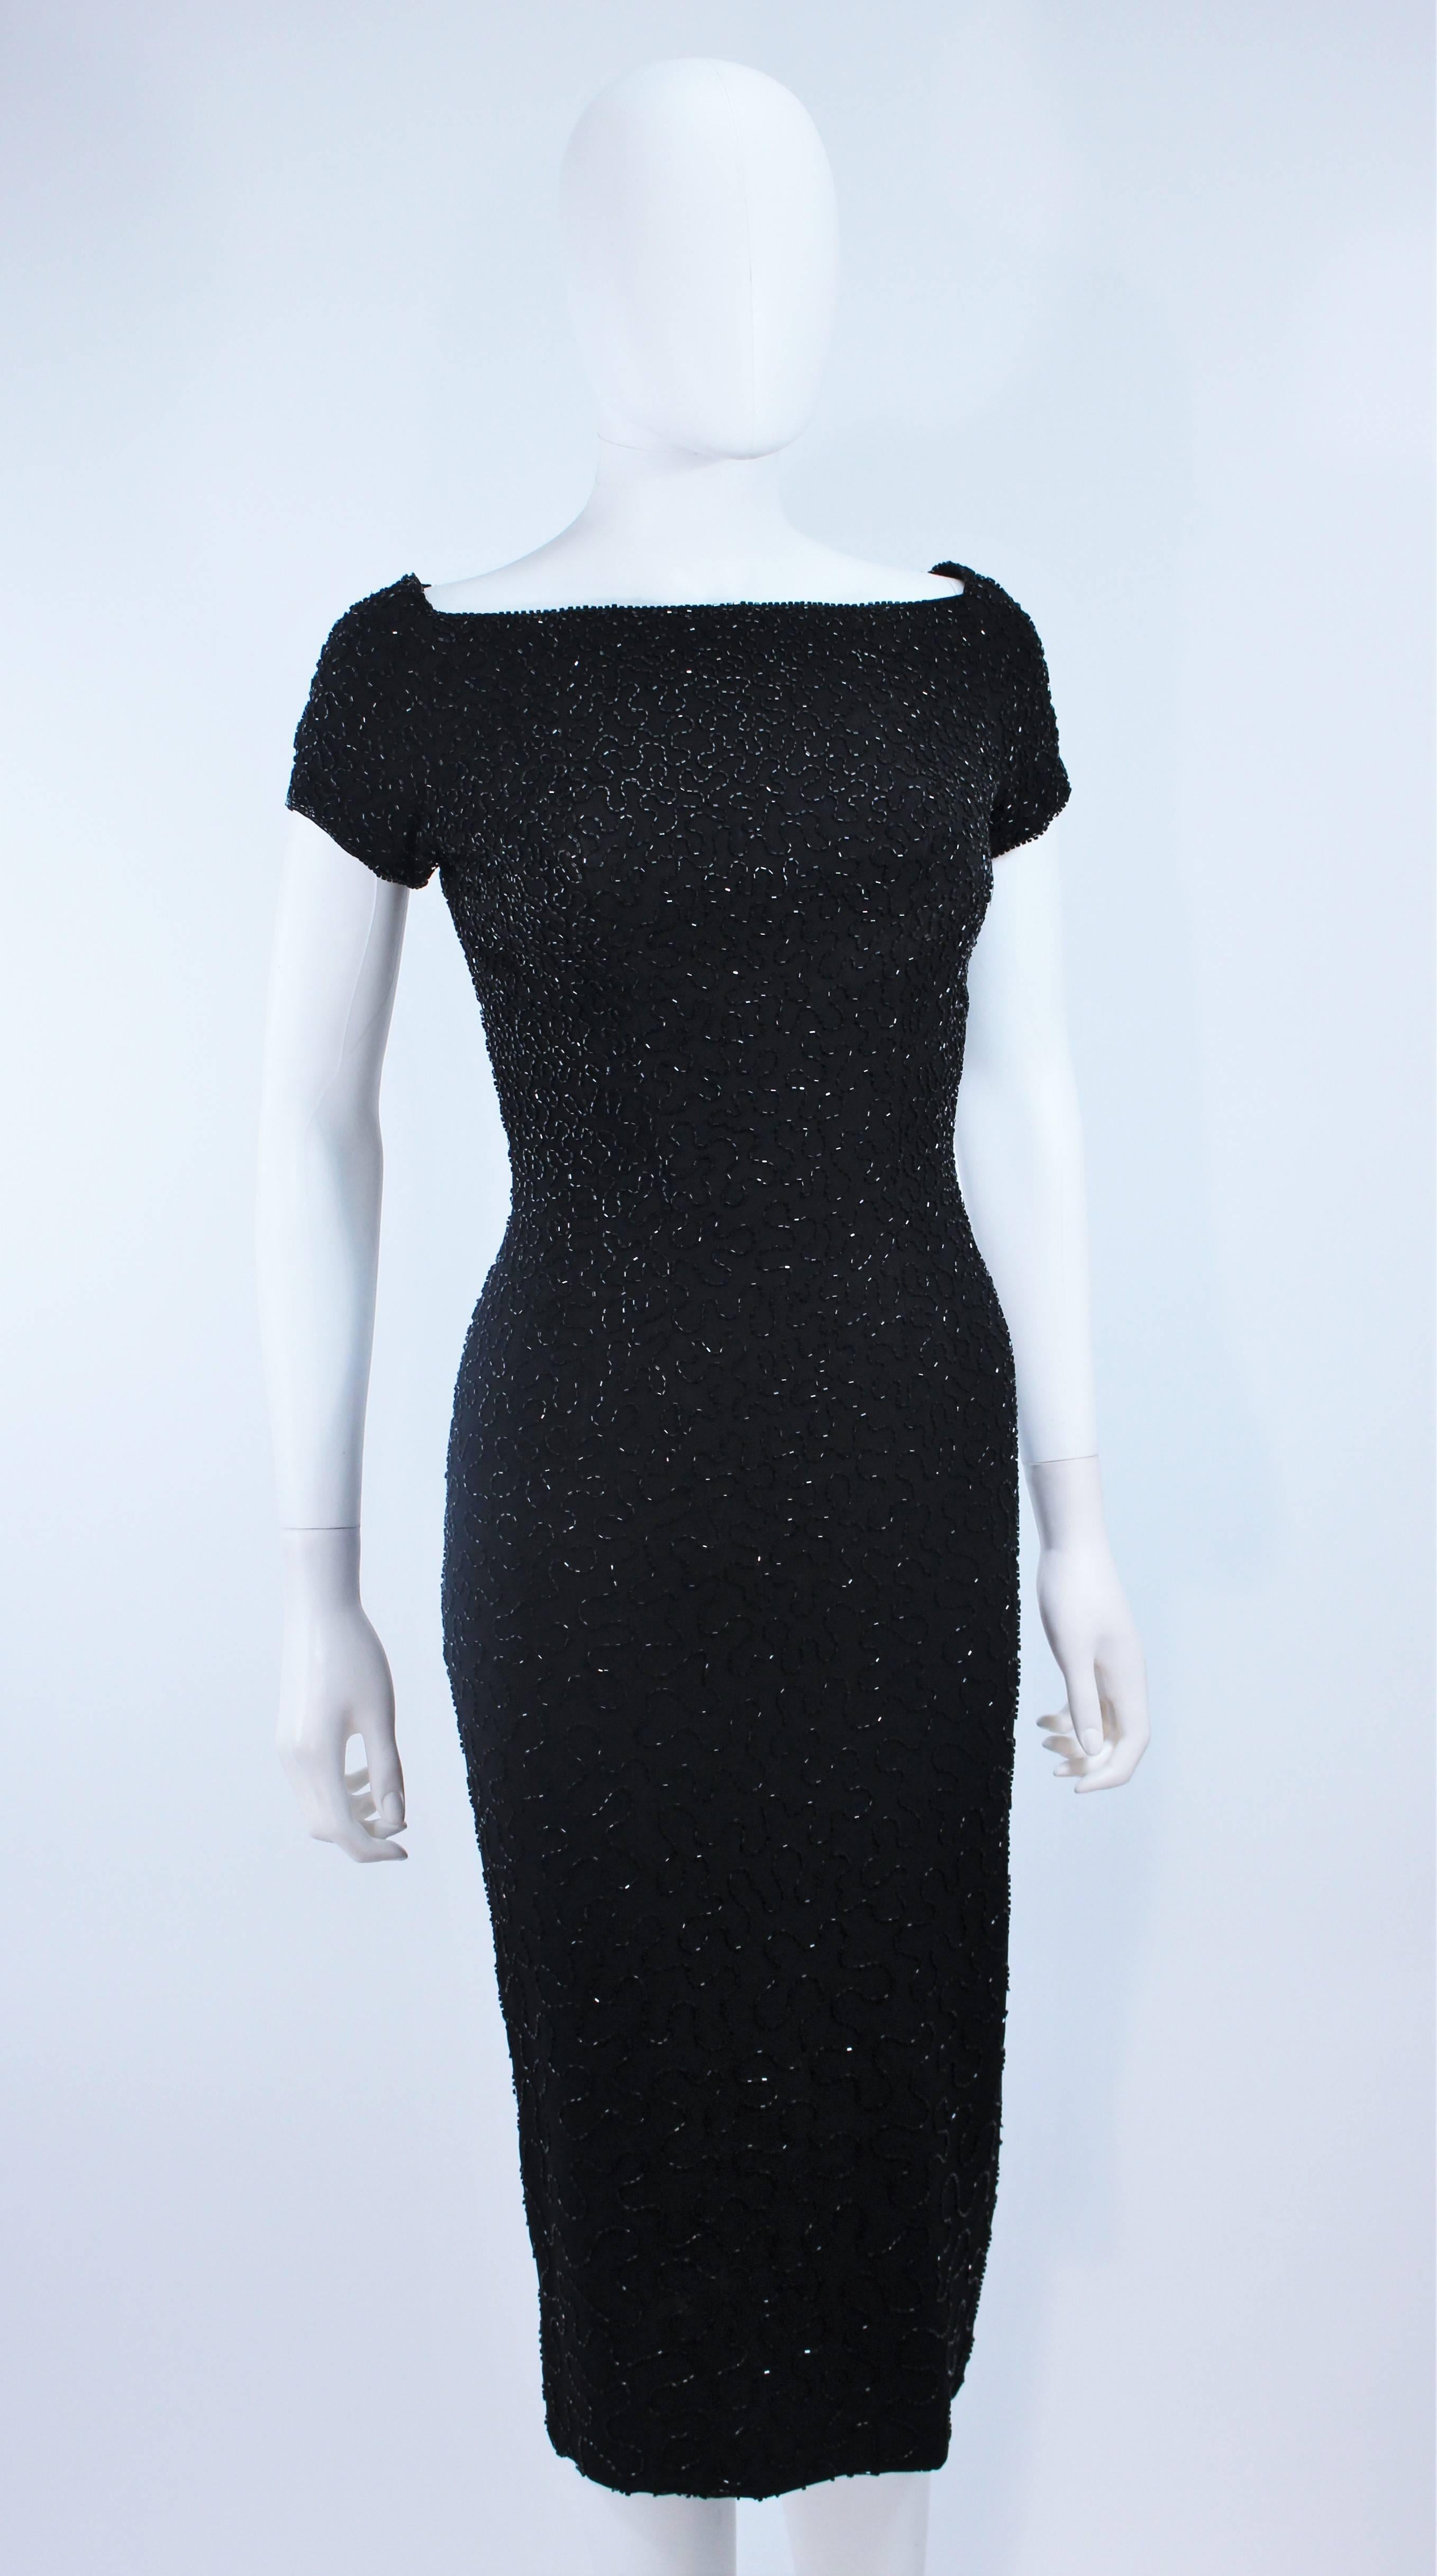 CEIL CHAPMAN Black Beaded Cocktail Dress with Square Neckline Size 2 For Sale 2